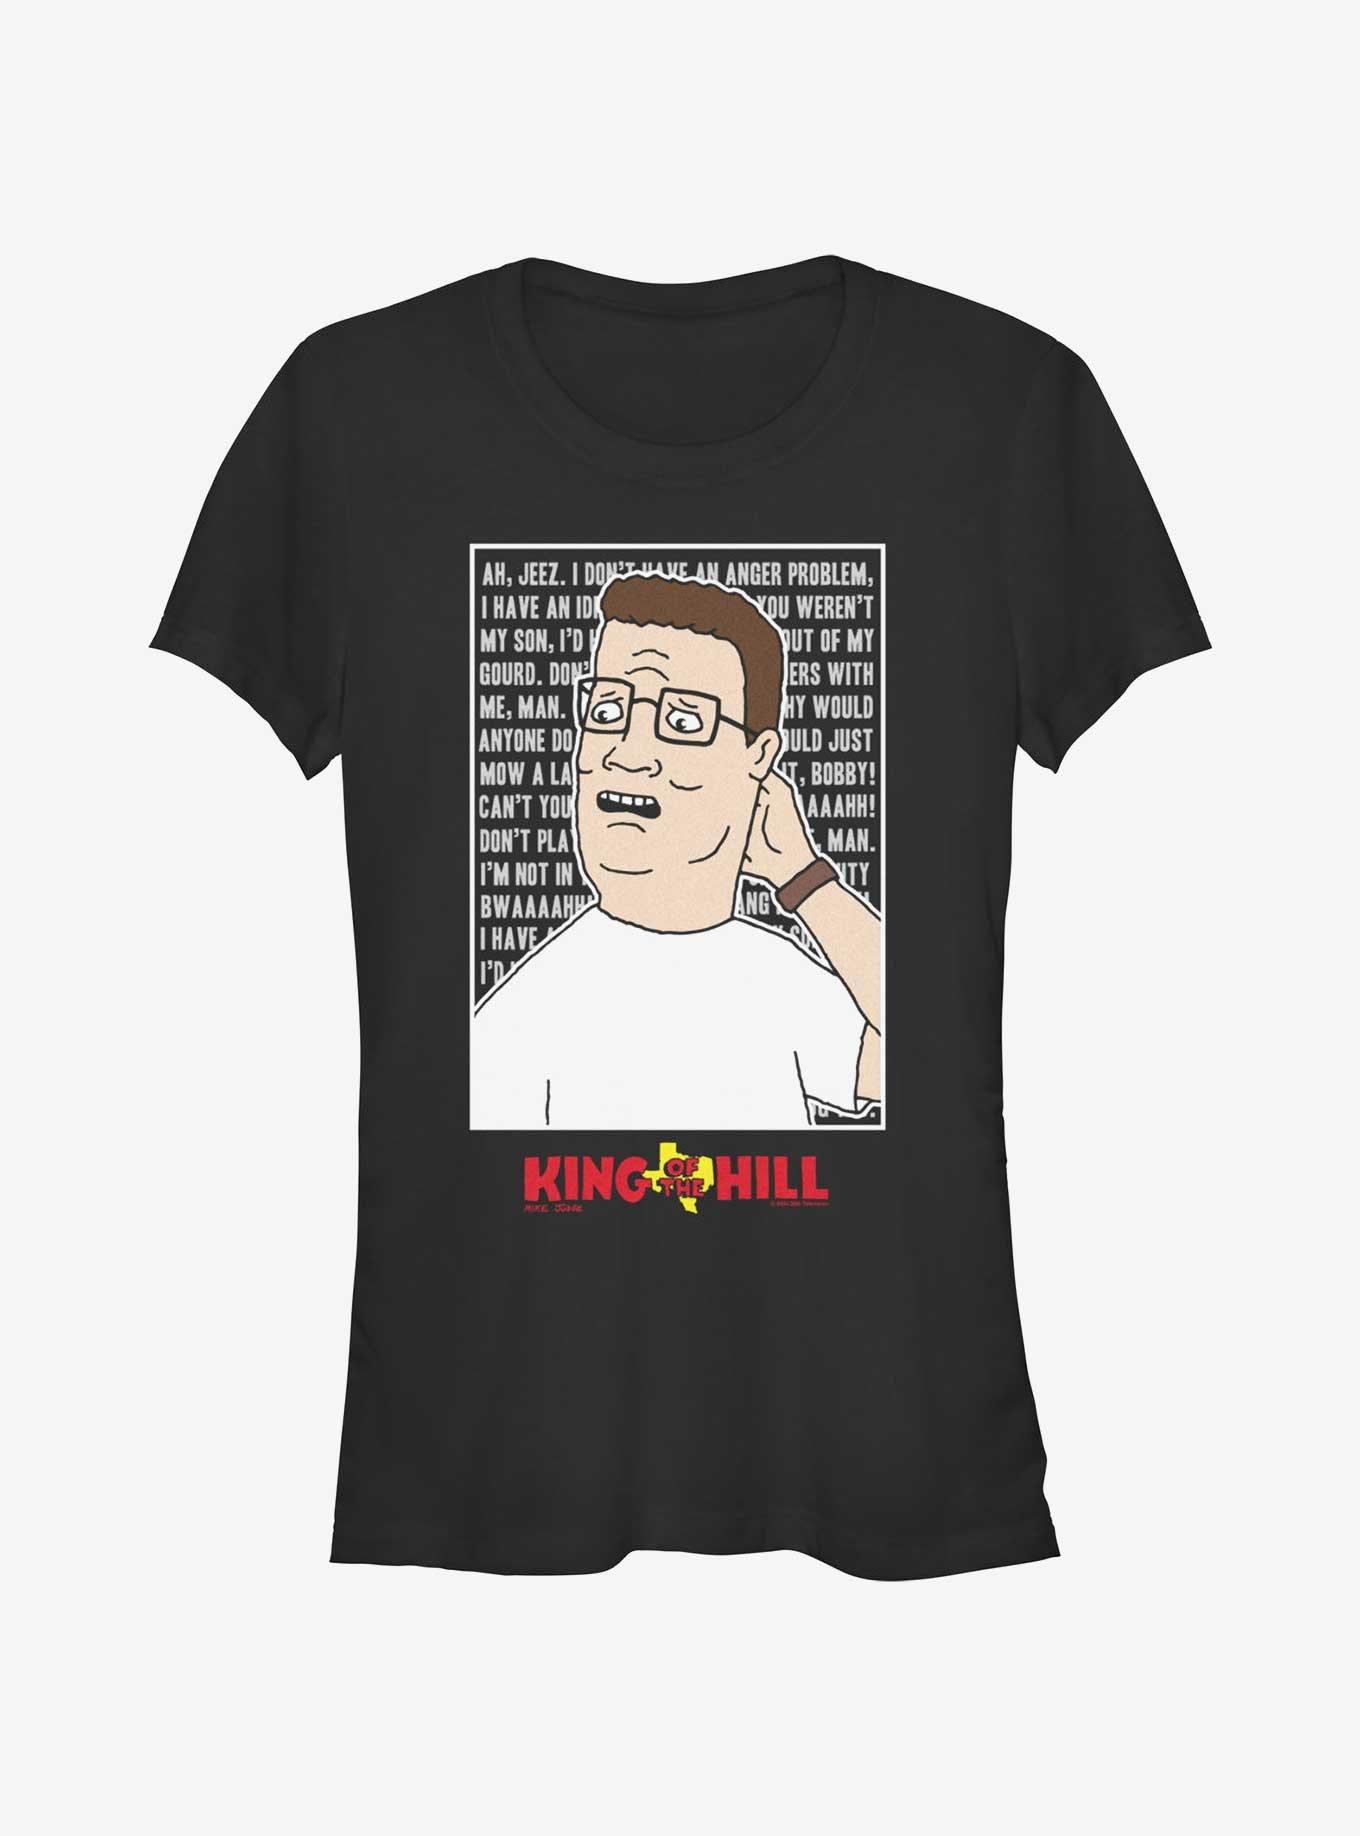 King of the Hill Hank Hill Quote Box Girls T-Shirt, BLACK, hi-res